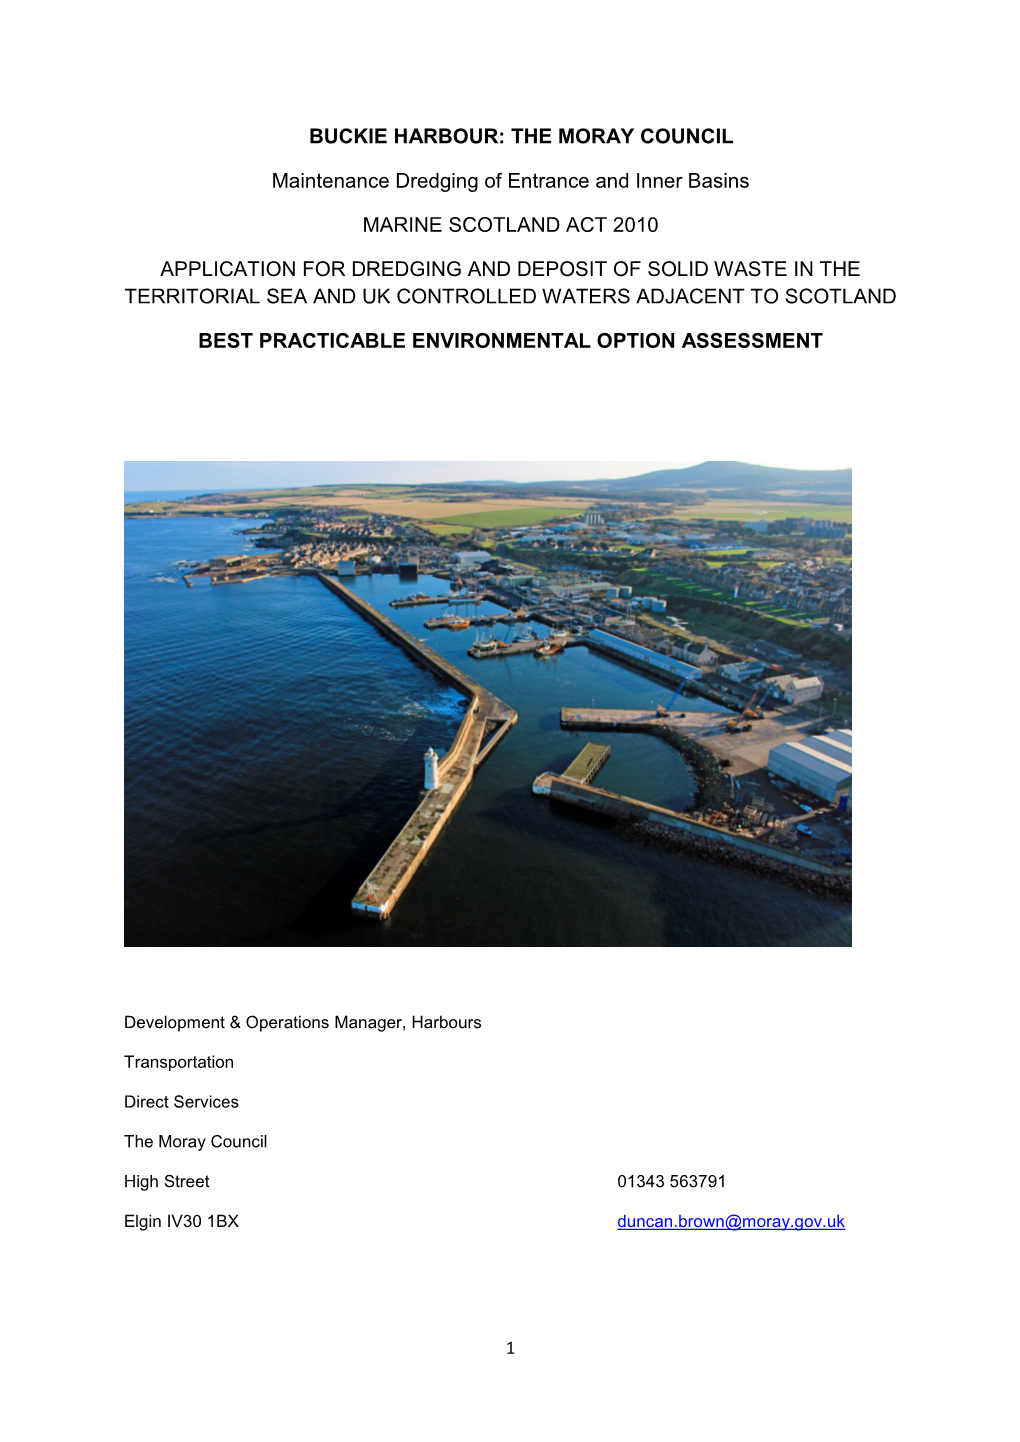 BUCKIE HARBOUR: the MORAY COUNCIL Maintenance Dredging